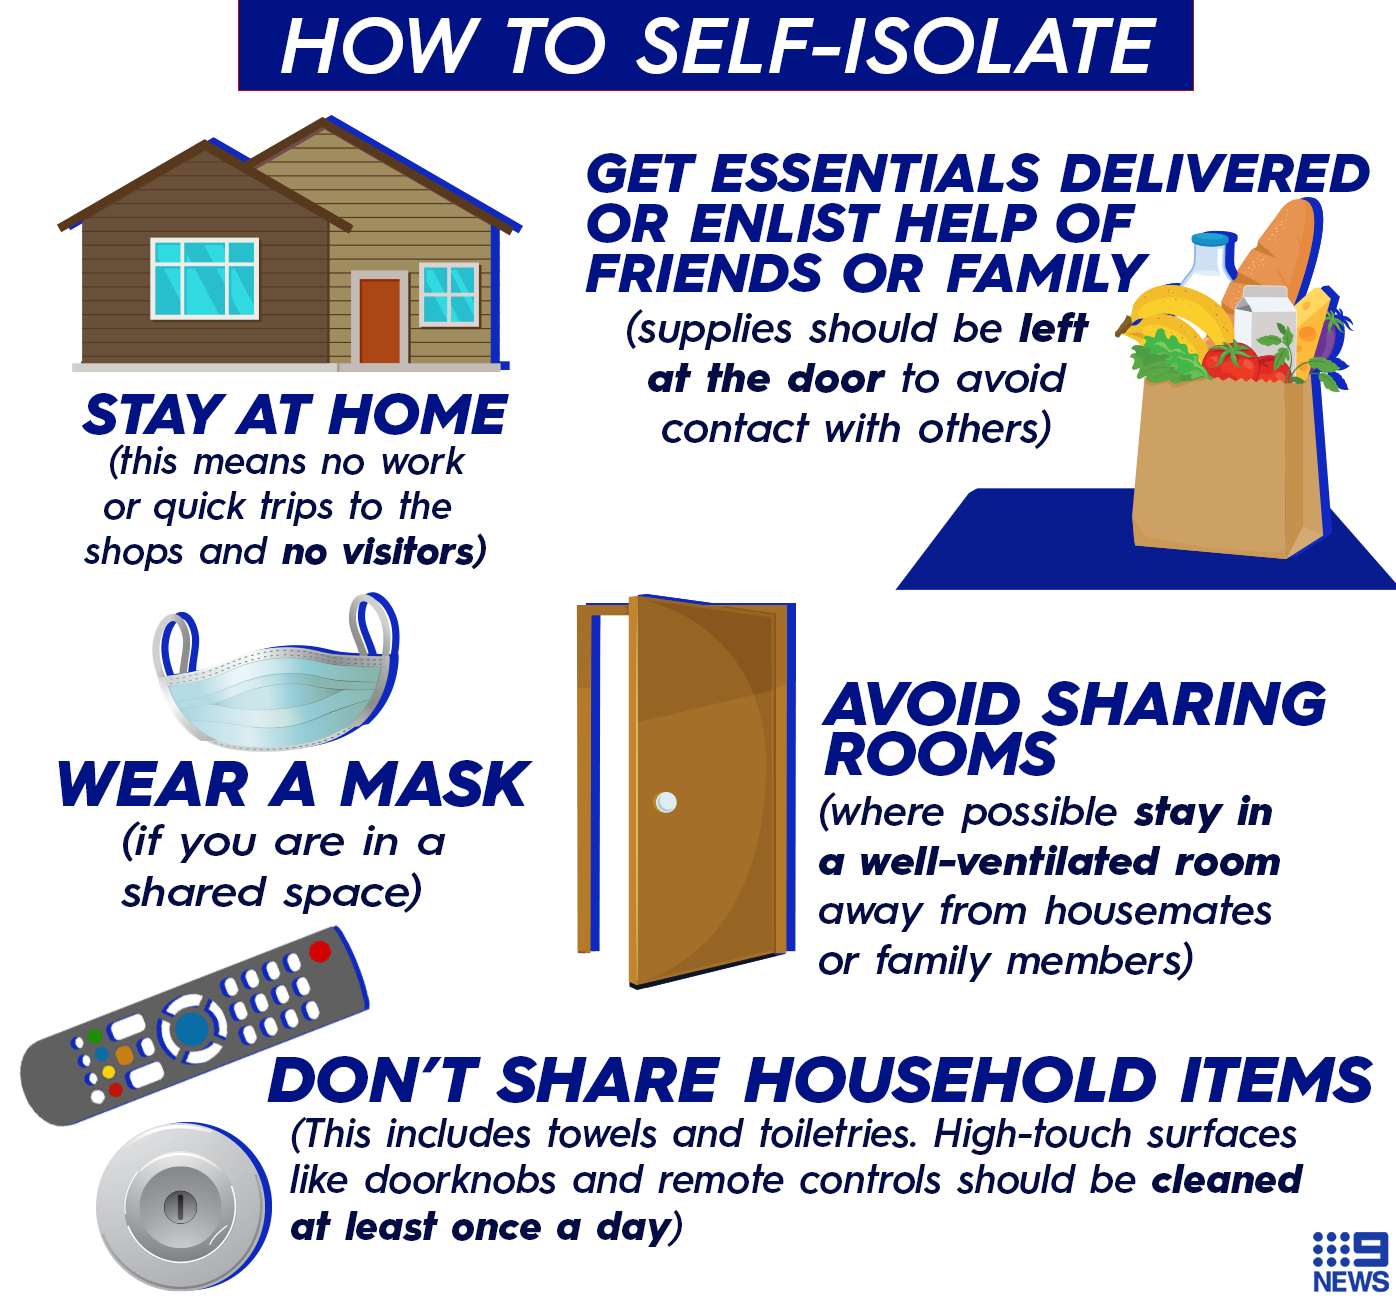 Advice on how to self-isolate.